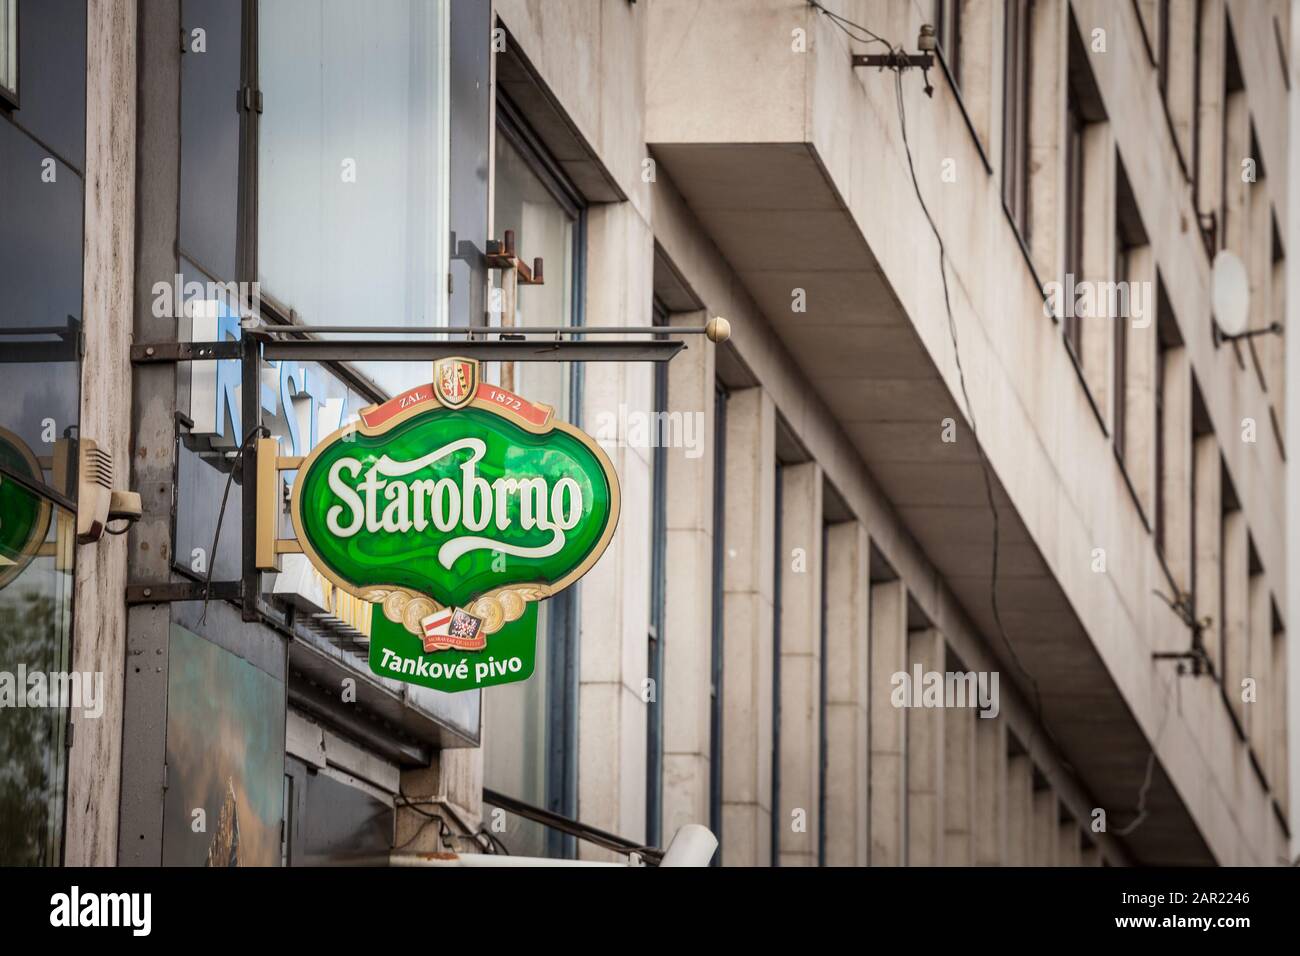 BRNO, CZECHIA - NOVEMBER 4, 2019:  Starobrno logo in front of a local retailer bar. Starobrno is a Czech brand of light lager beer, one of the biggest Stock Photo